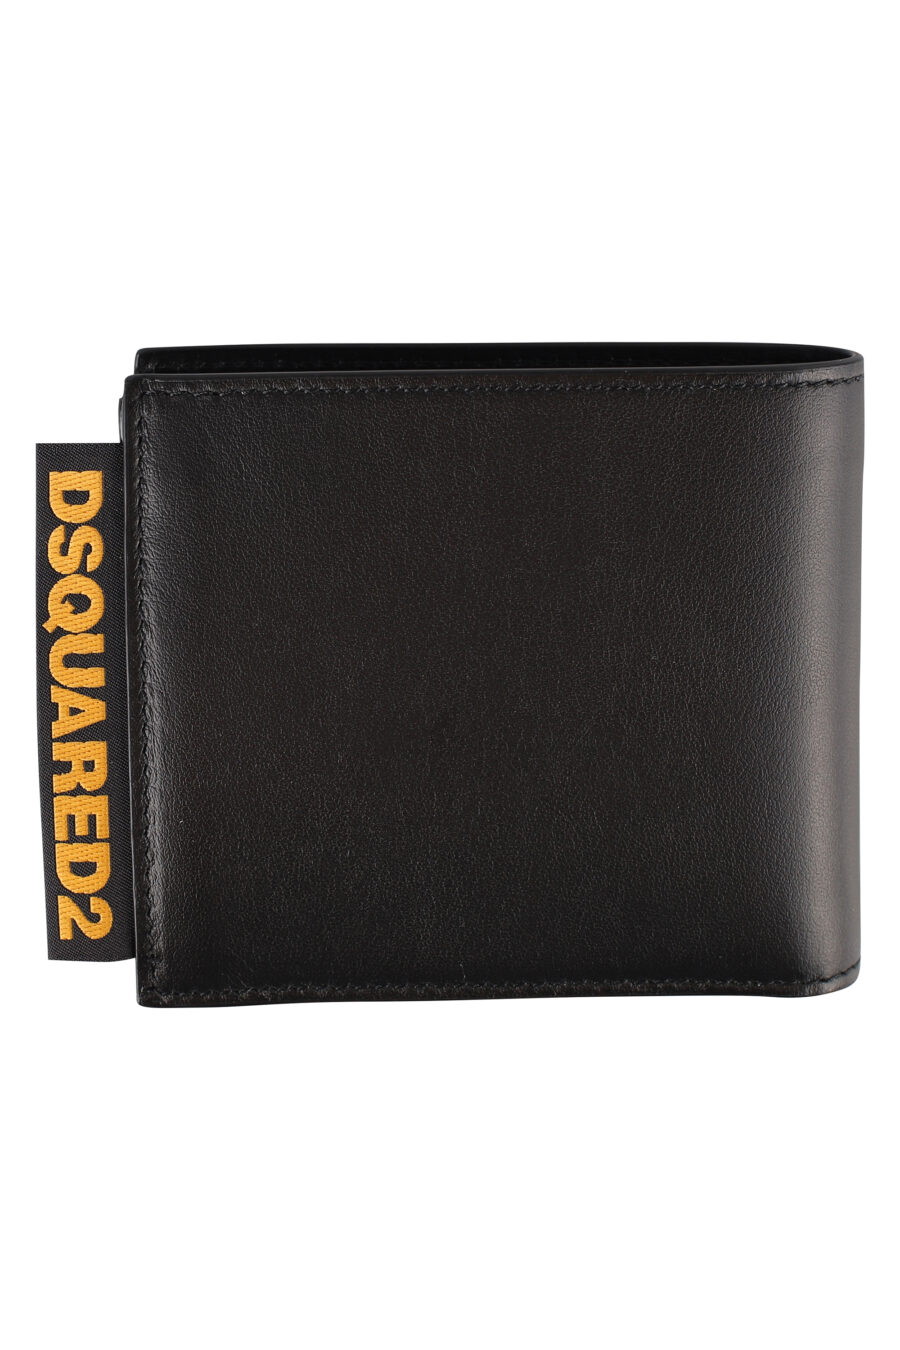 Black wallet with yellow label and logo - IMG 1274